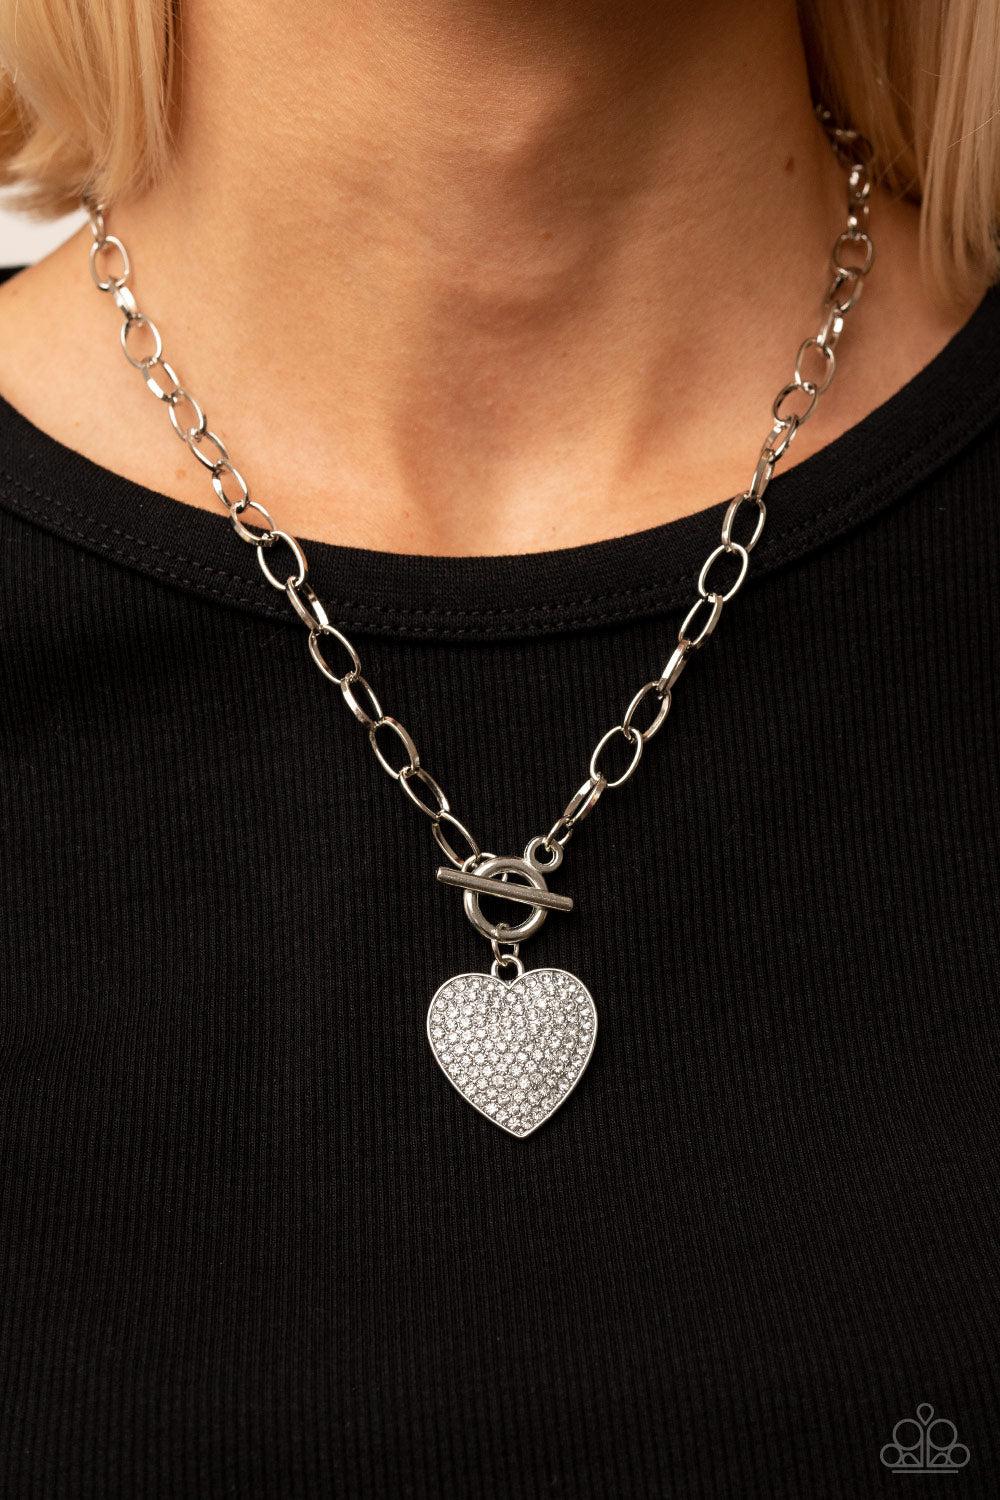 If You LUST White Rhinestone Heart Necklace - Paparazzi Accessories- lightbox - CarasShop.com - $5 Jewelry by Cara Jewels